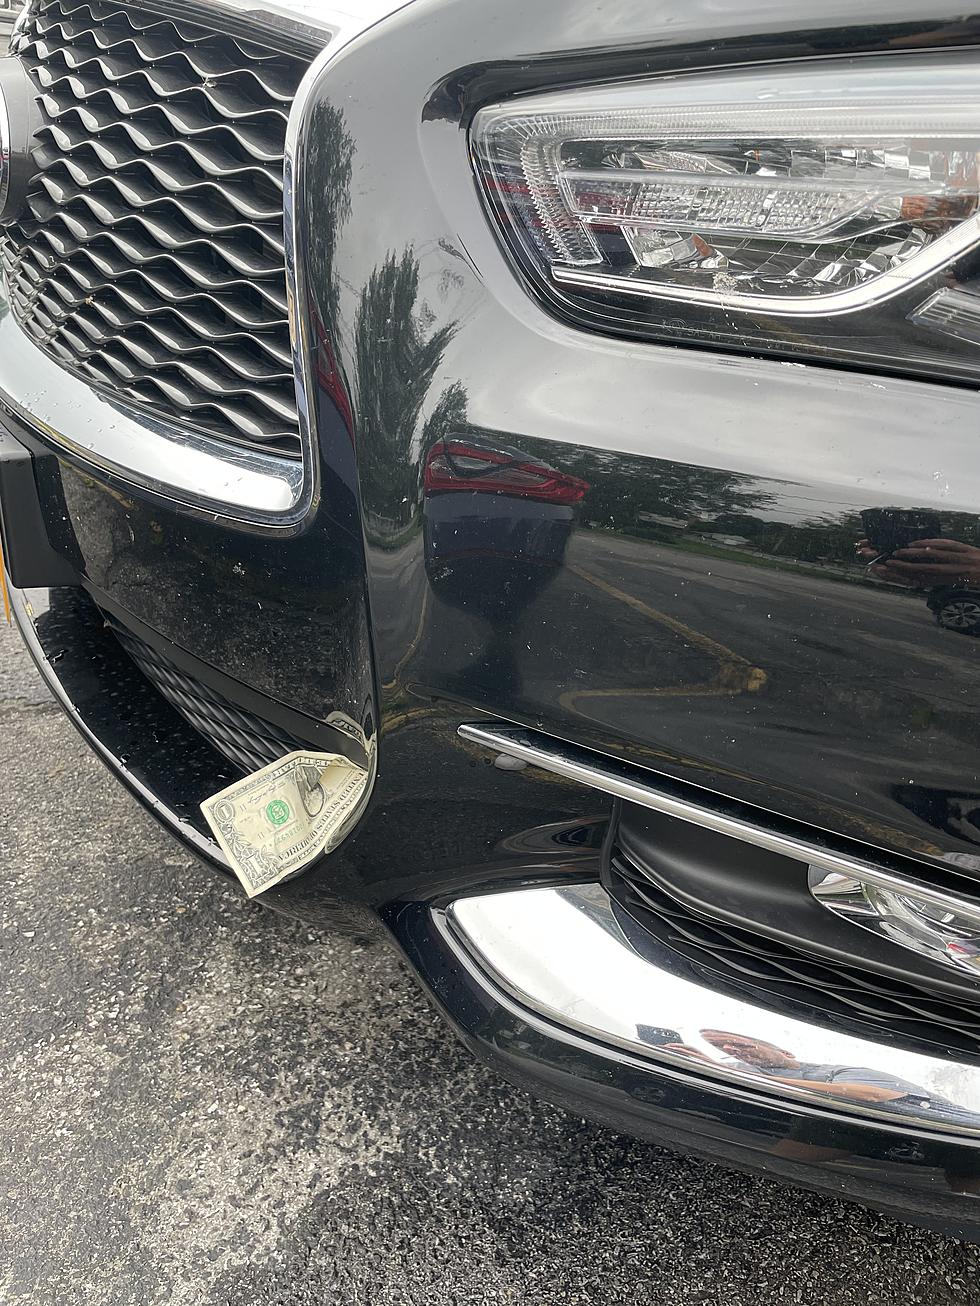 If You Find A Dollar Bill in Your Car Bumper, Don&#8217;t Take It